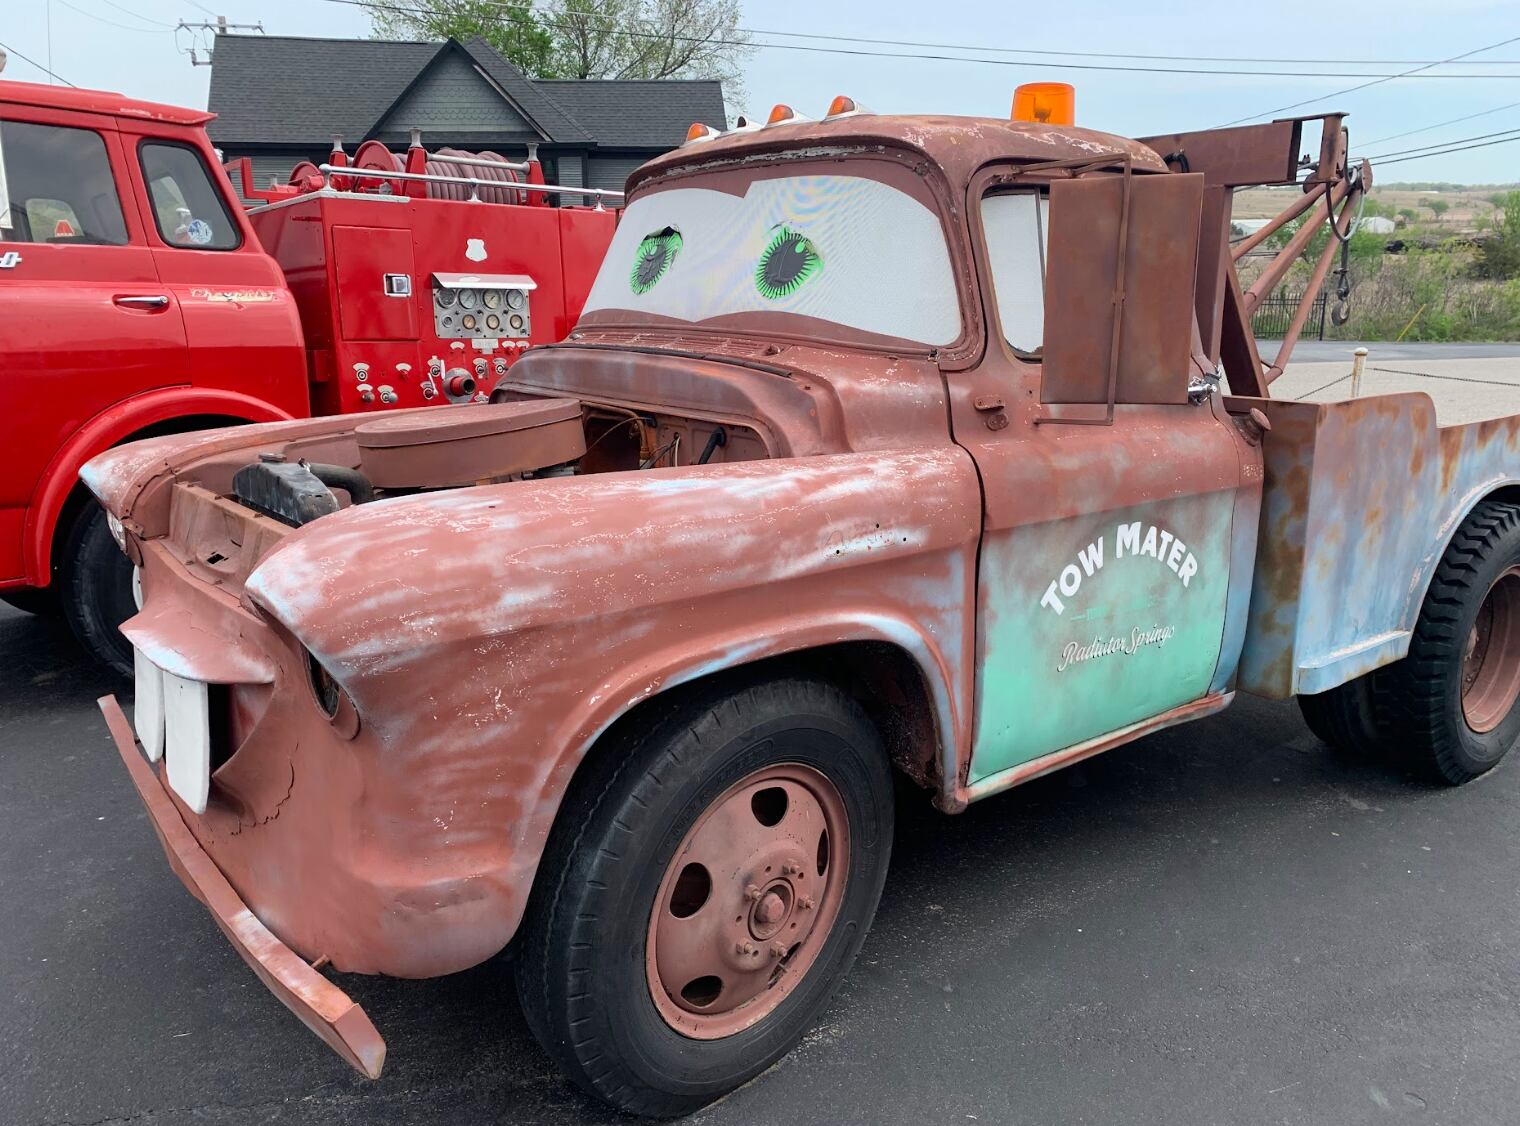 Mater from the Pixar film Cars was inspired by a real local character from Oklahoma's stretch of Route 66.